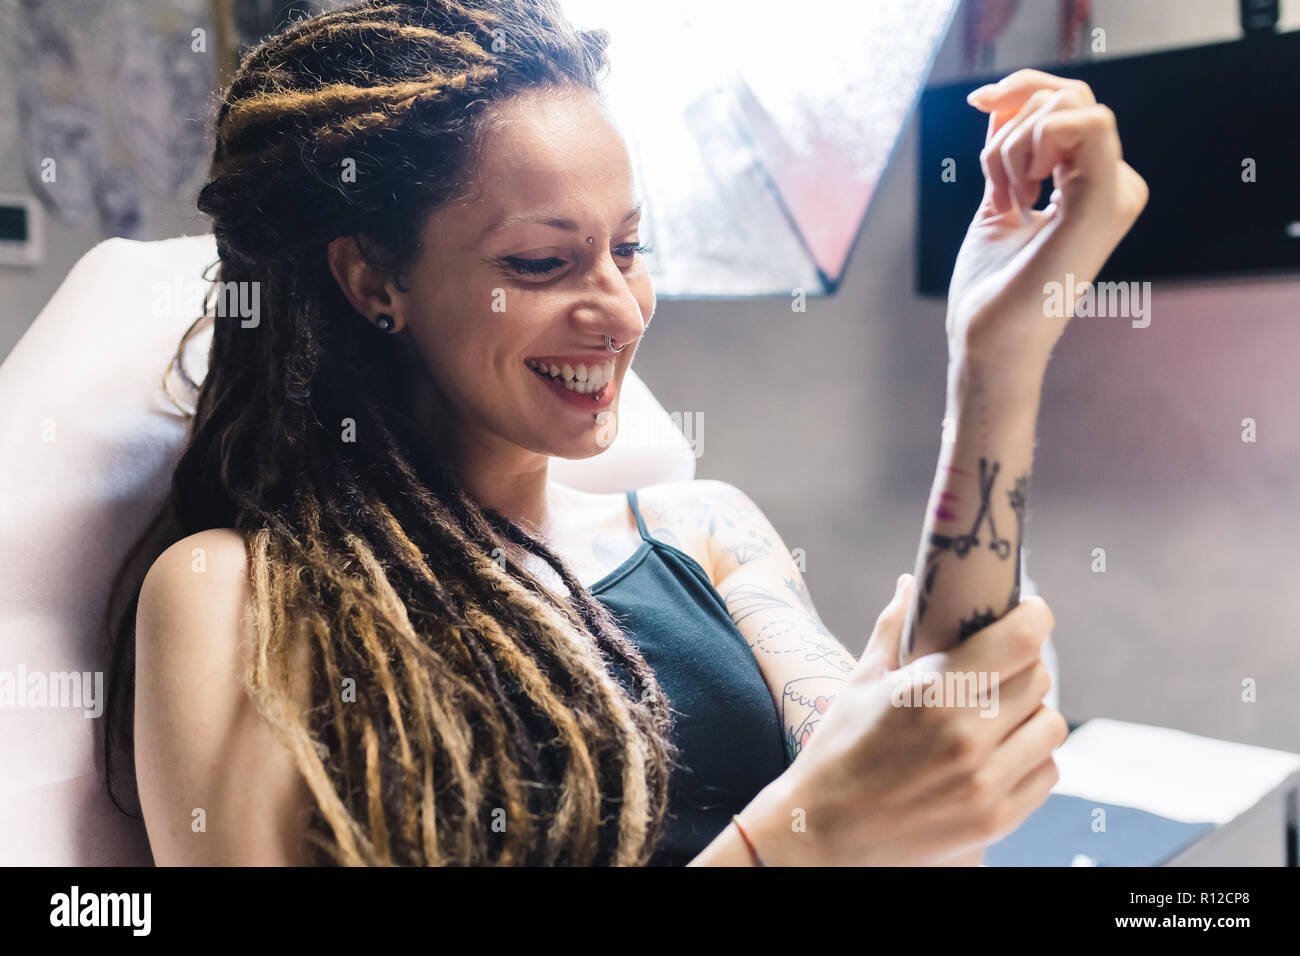 Woman in tattoo parlour Stock Photo